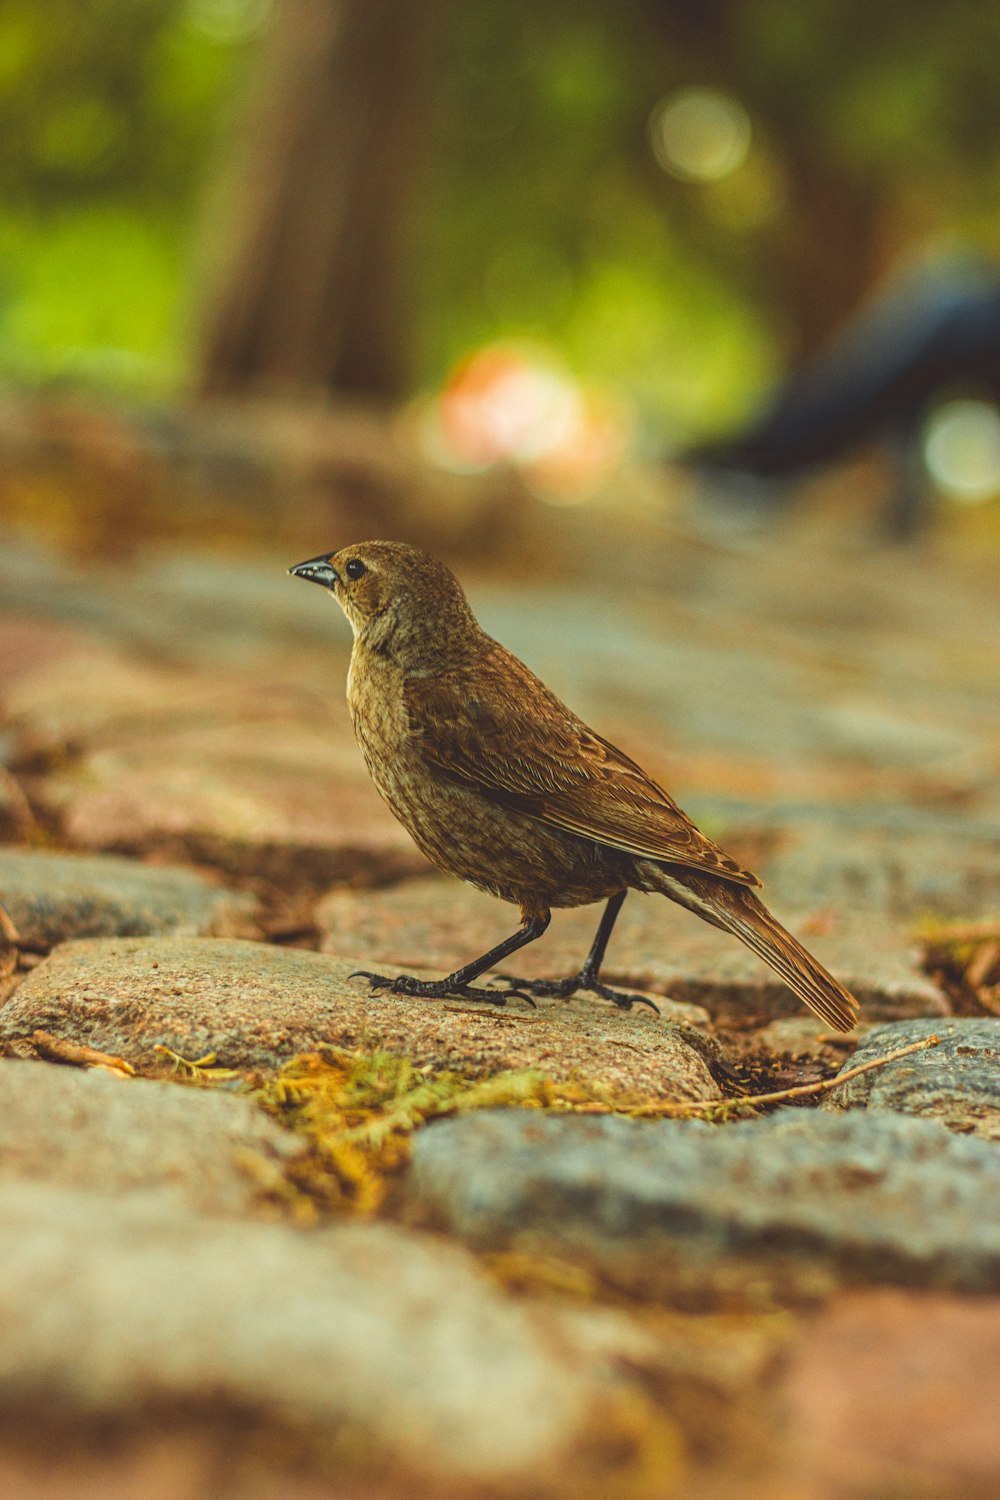 a small bird standing on a rock in a park